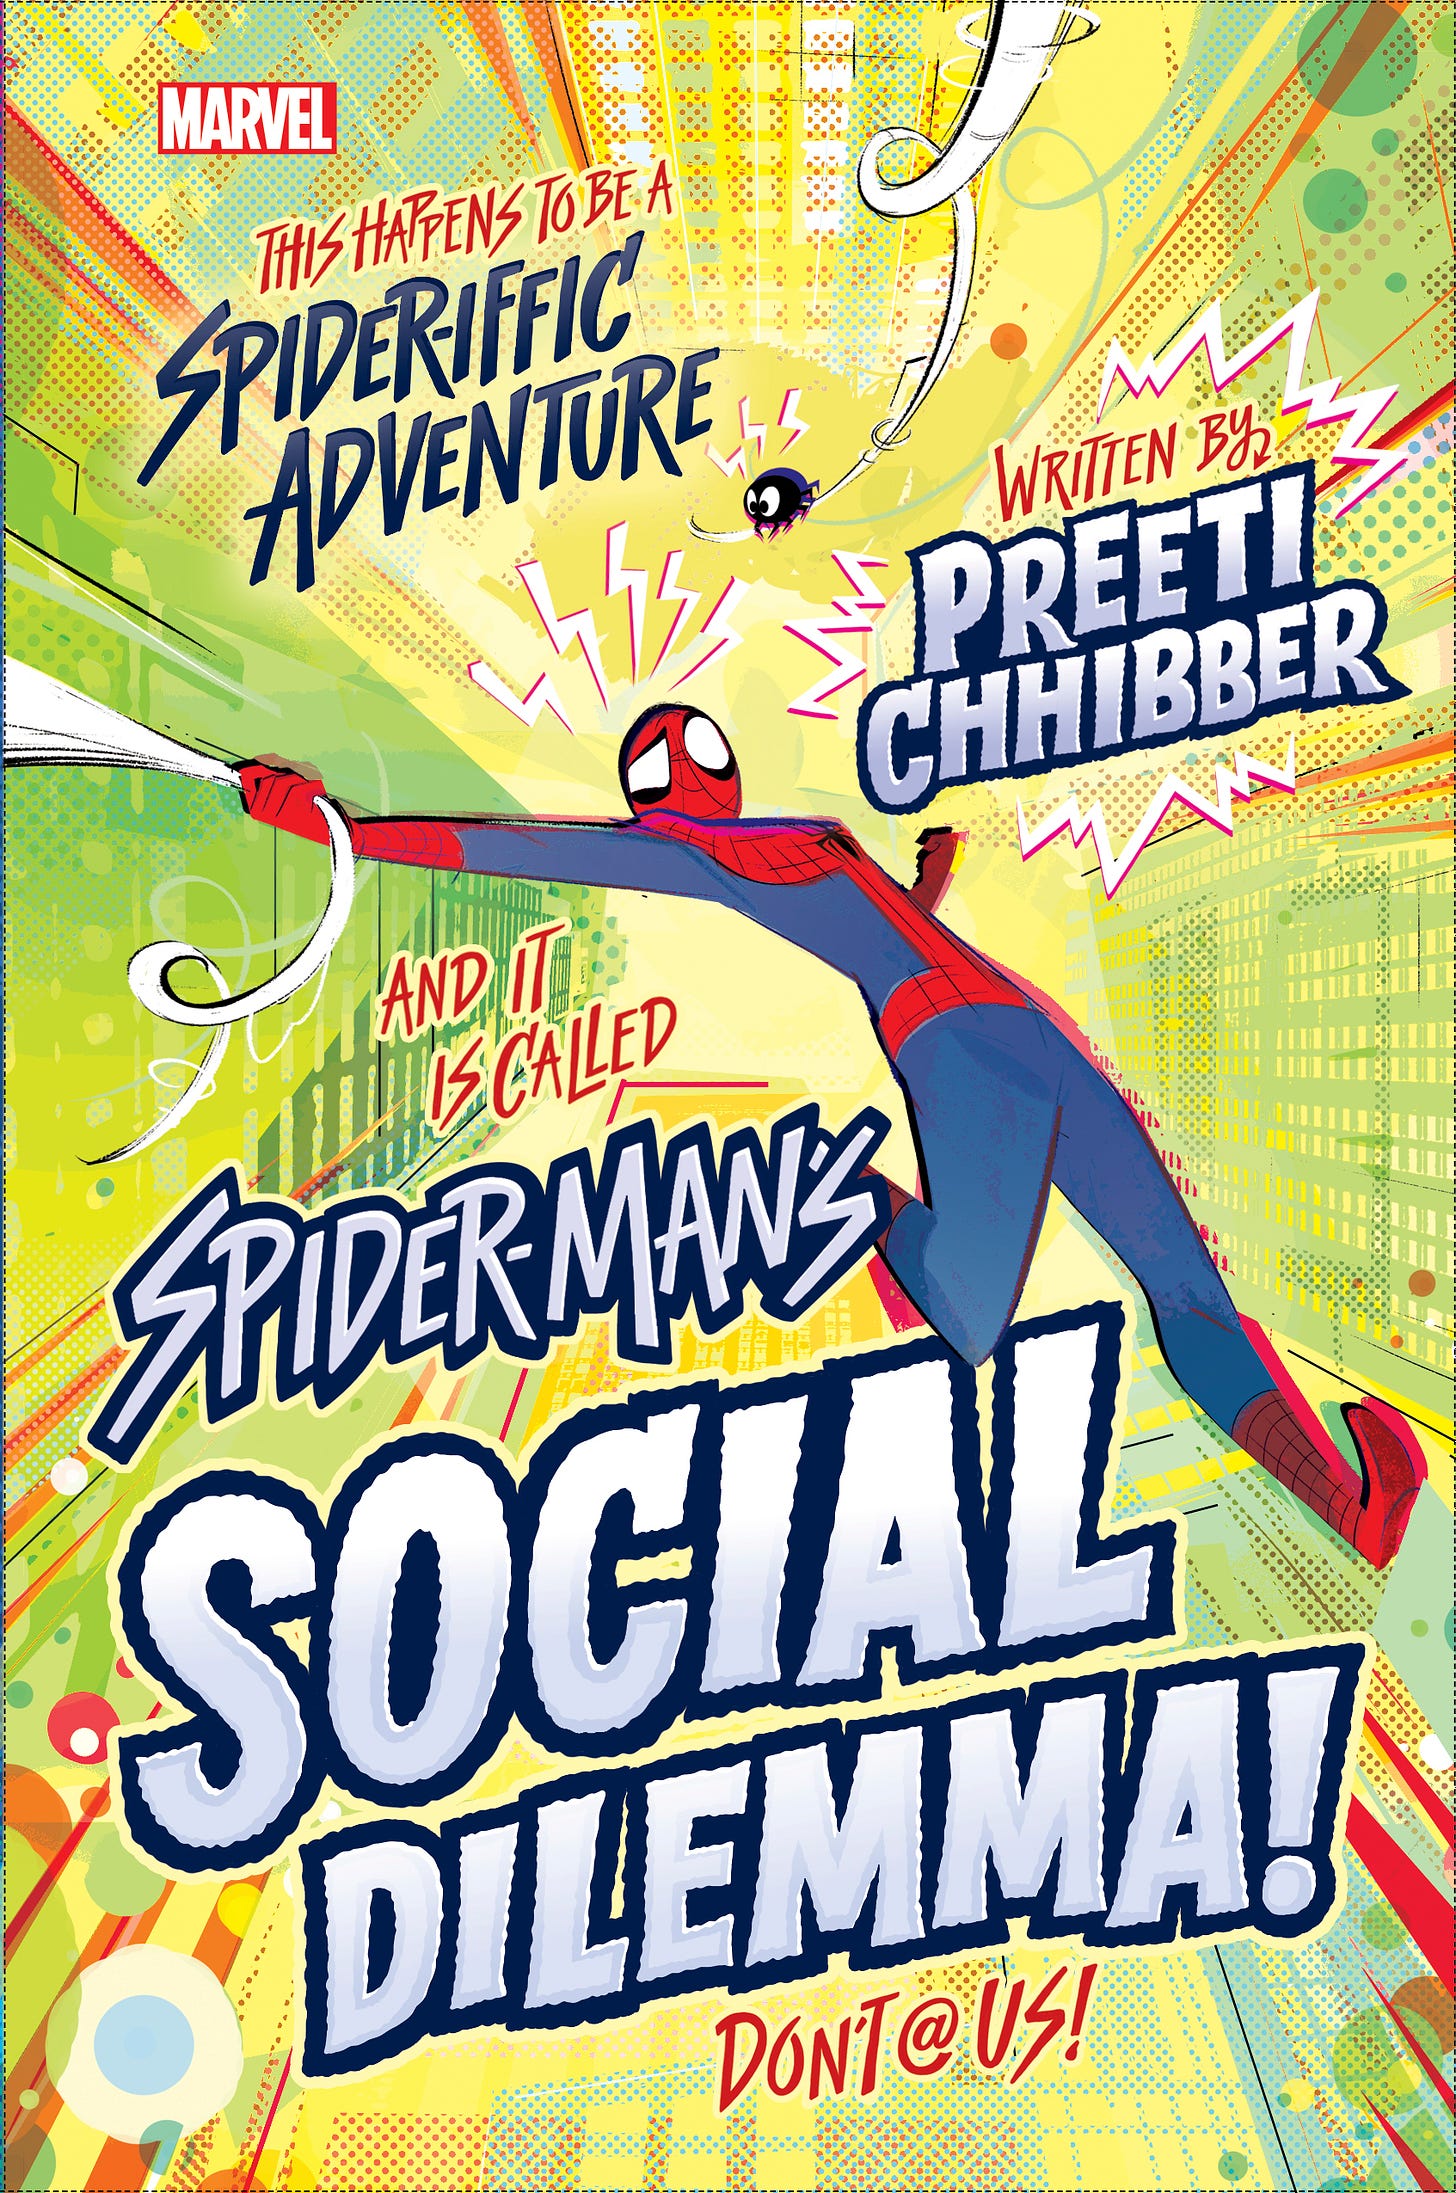 The cover for Spider-Man's Social Dilemma, the first book in my Spider-Man trilogy